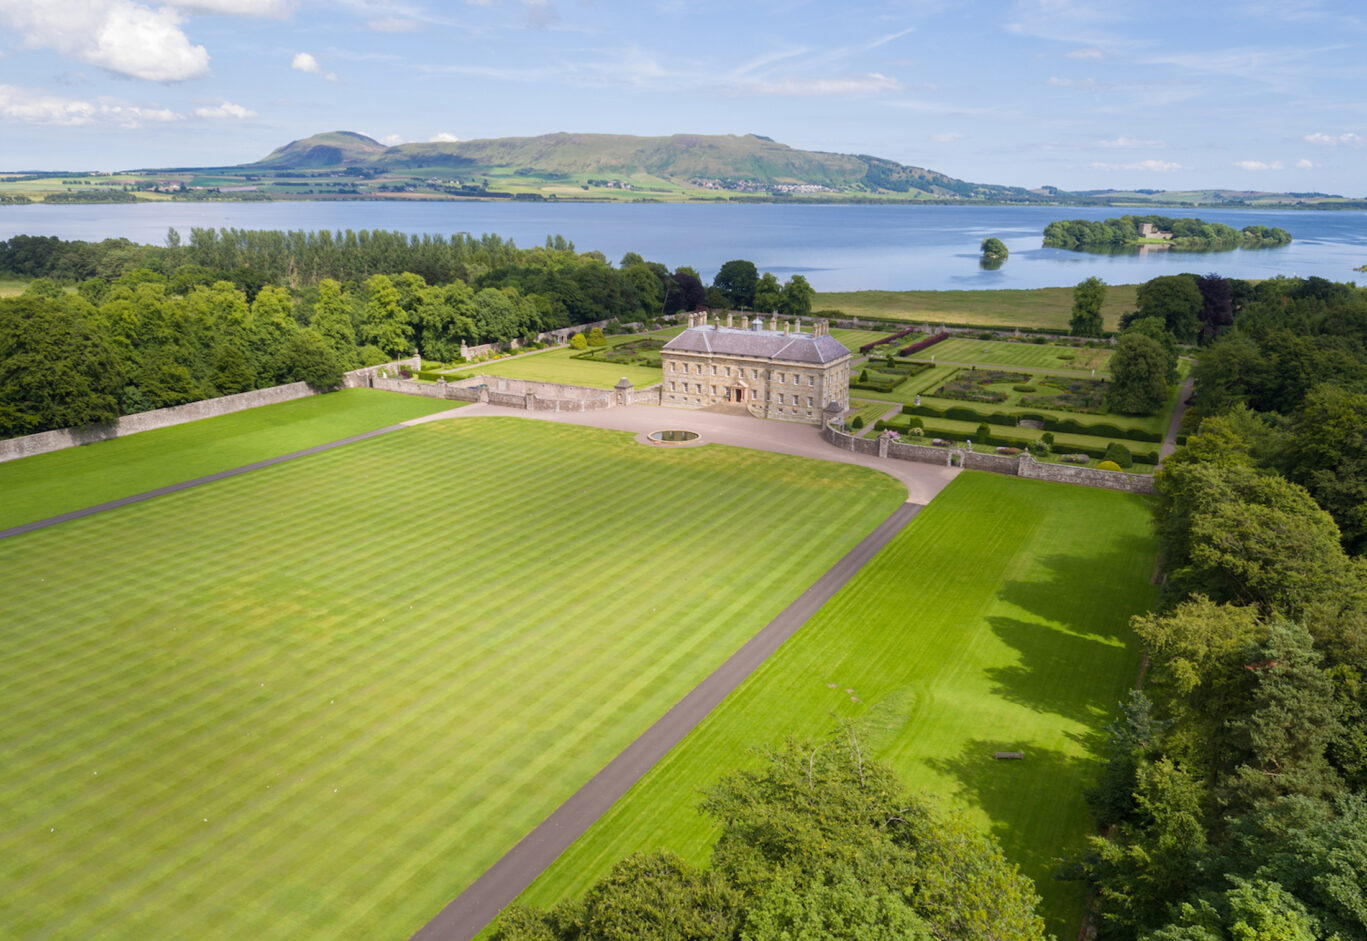 Kinross House Luxury Private Travel